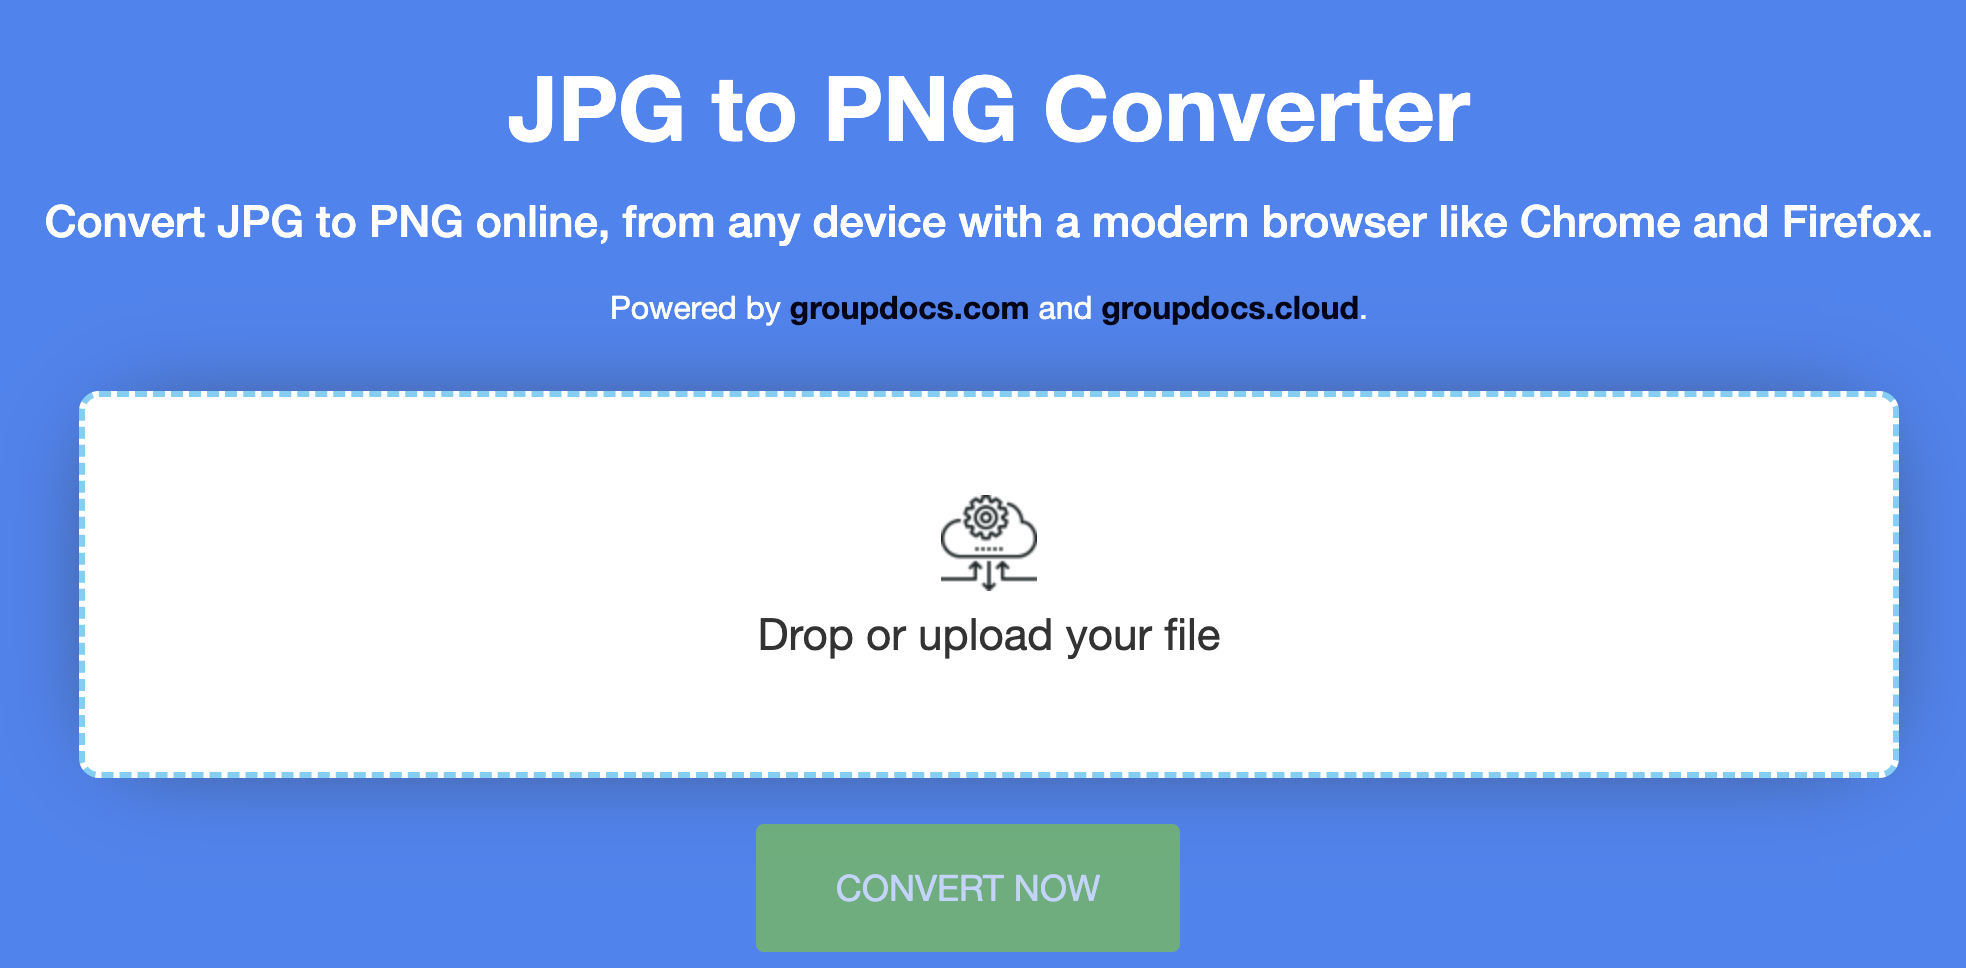 Free JPG to PNG converter: Change JPG images to PNG